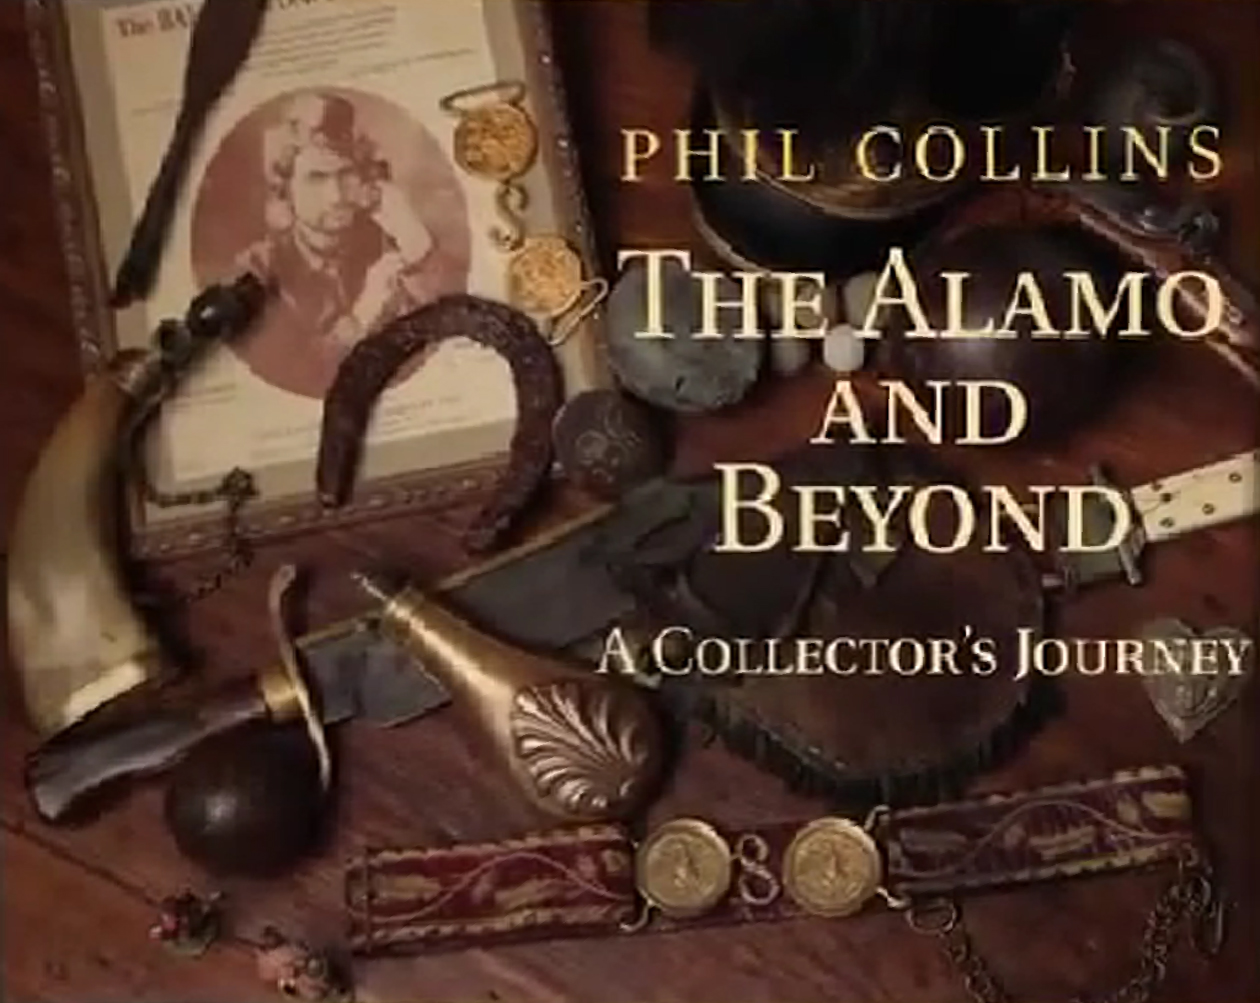 The Alamo And Beyond - A Collector's Journey